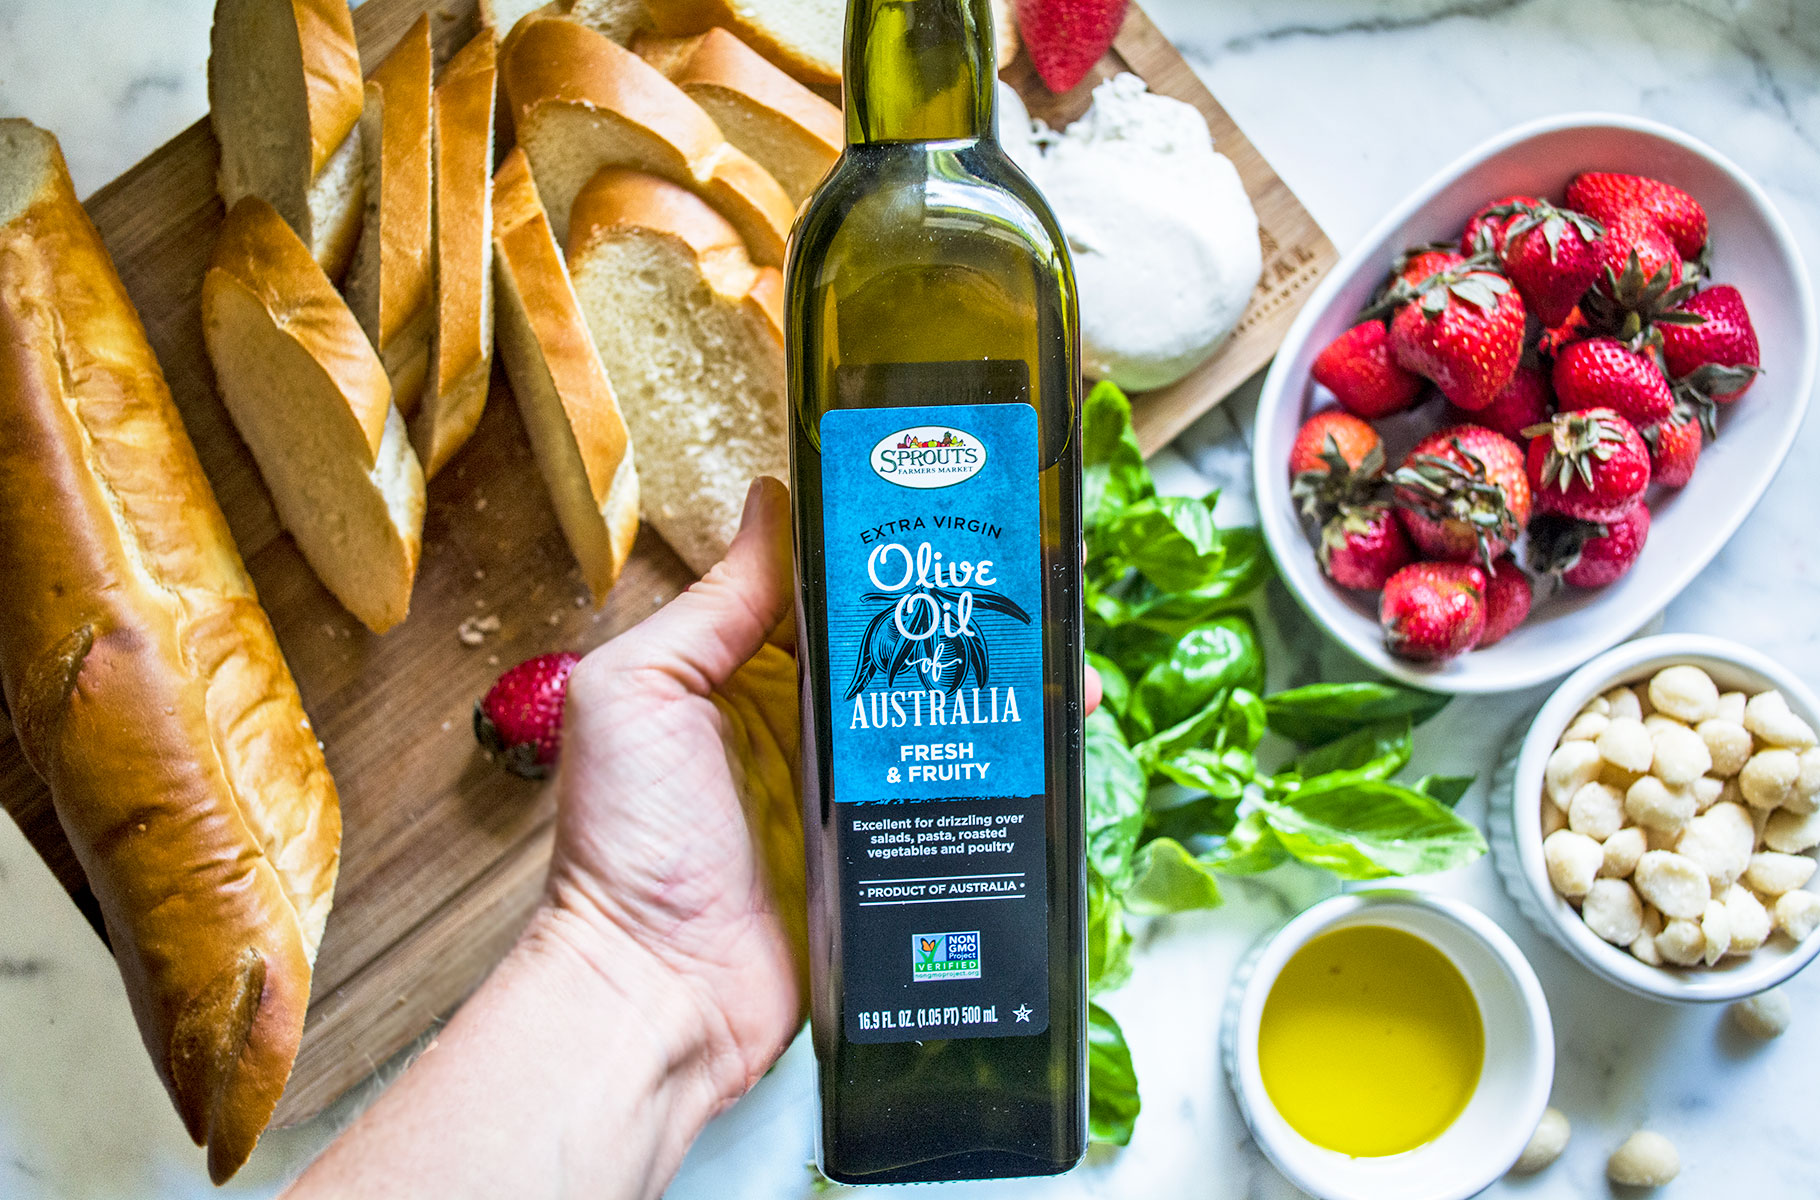 Sprouts Olive Oil of Australia